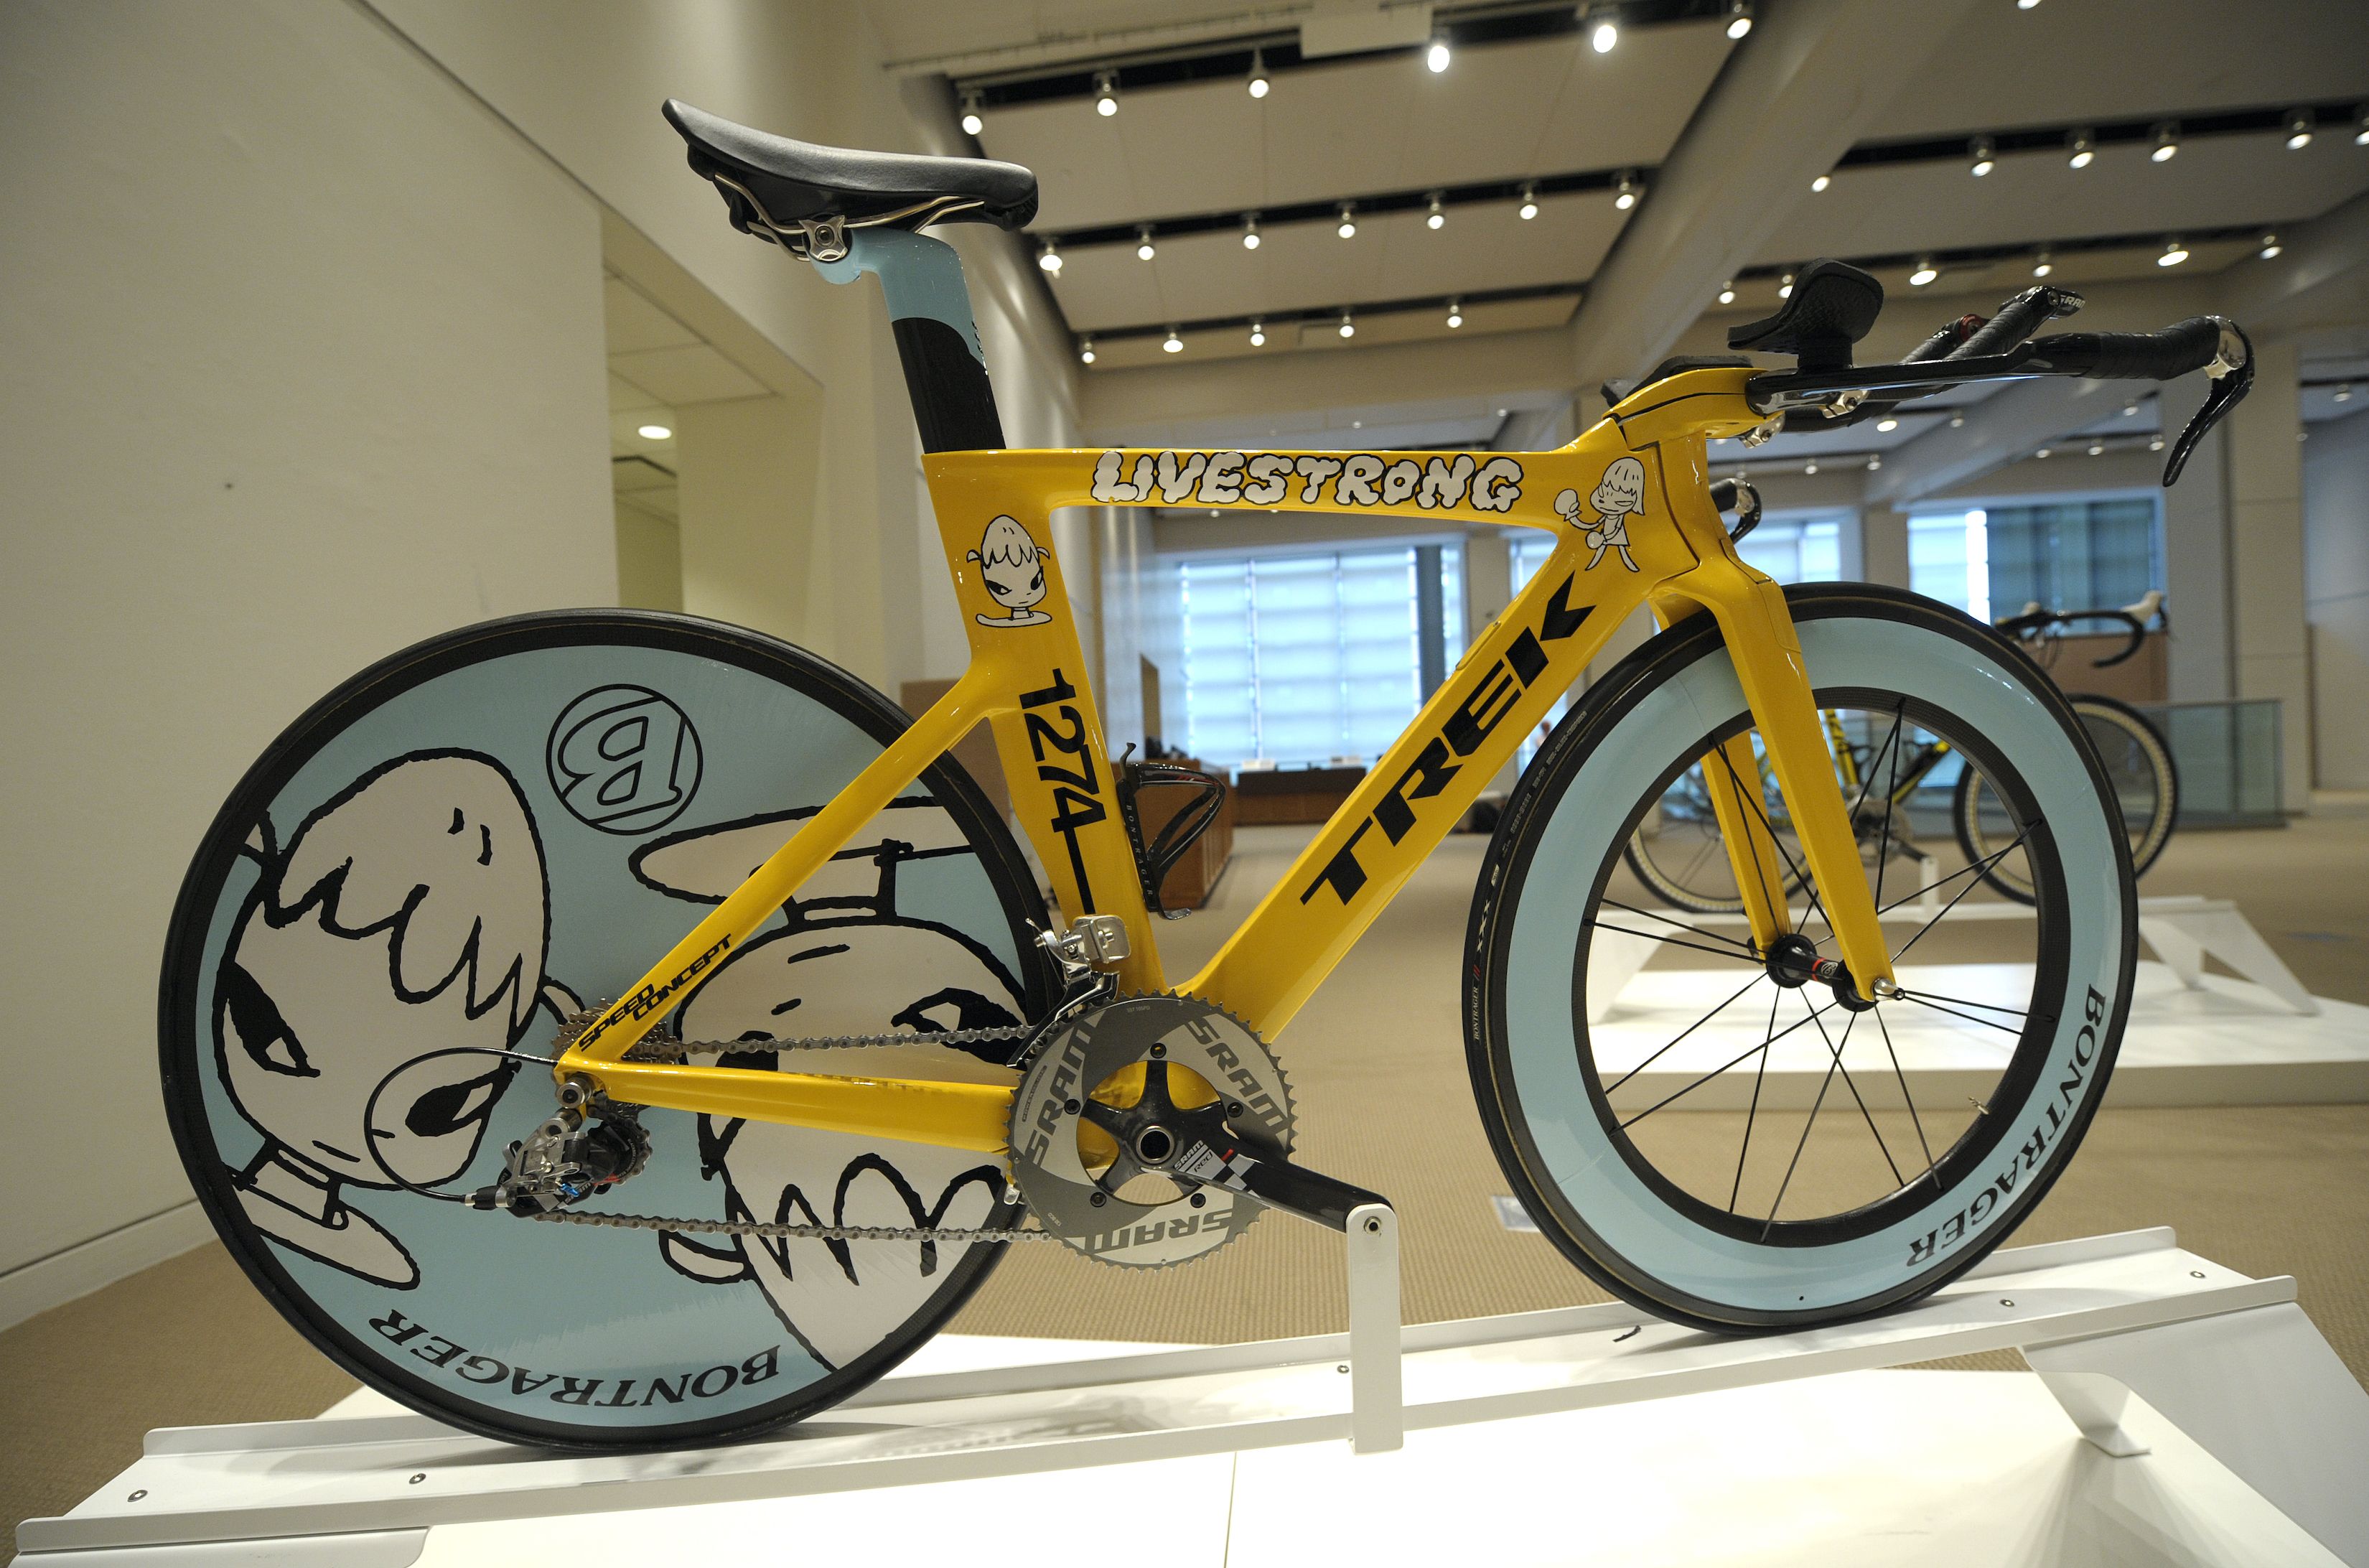 most expensive bicycle in the world 2022